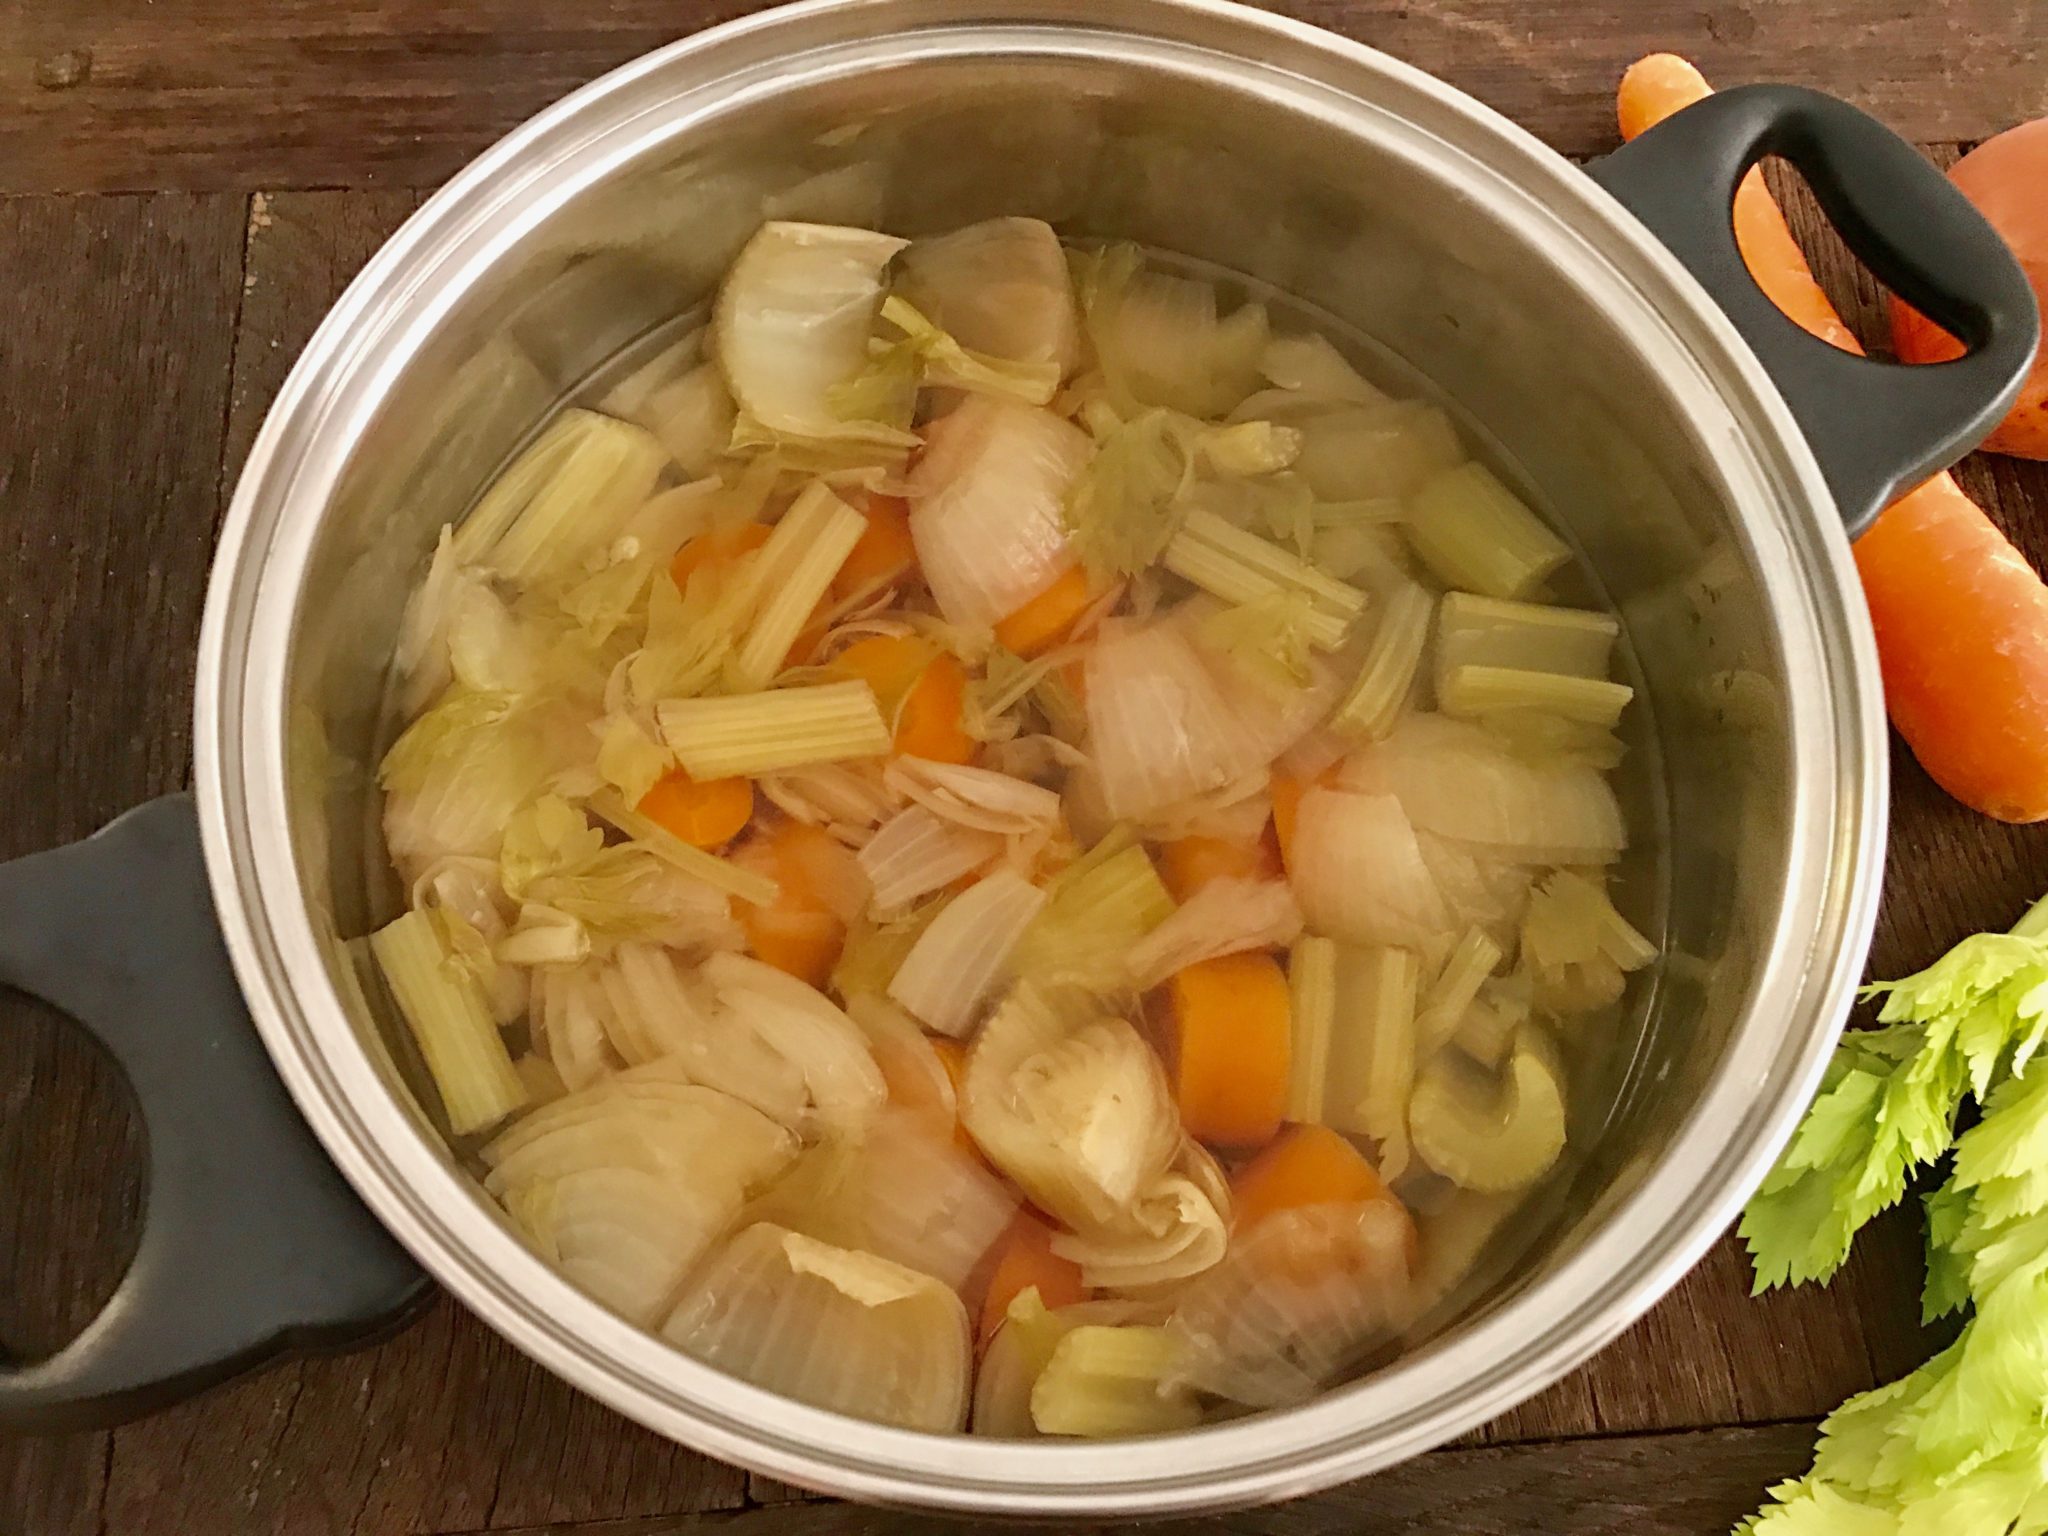 when it's cooked we call it vegetable broth